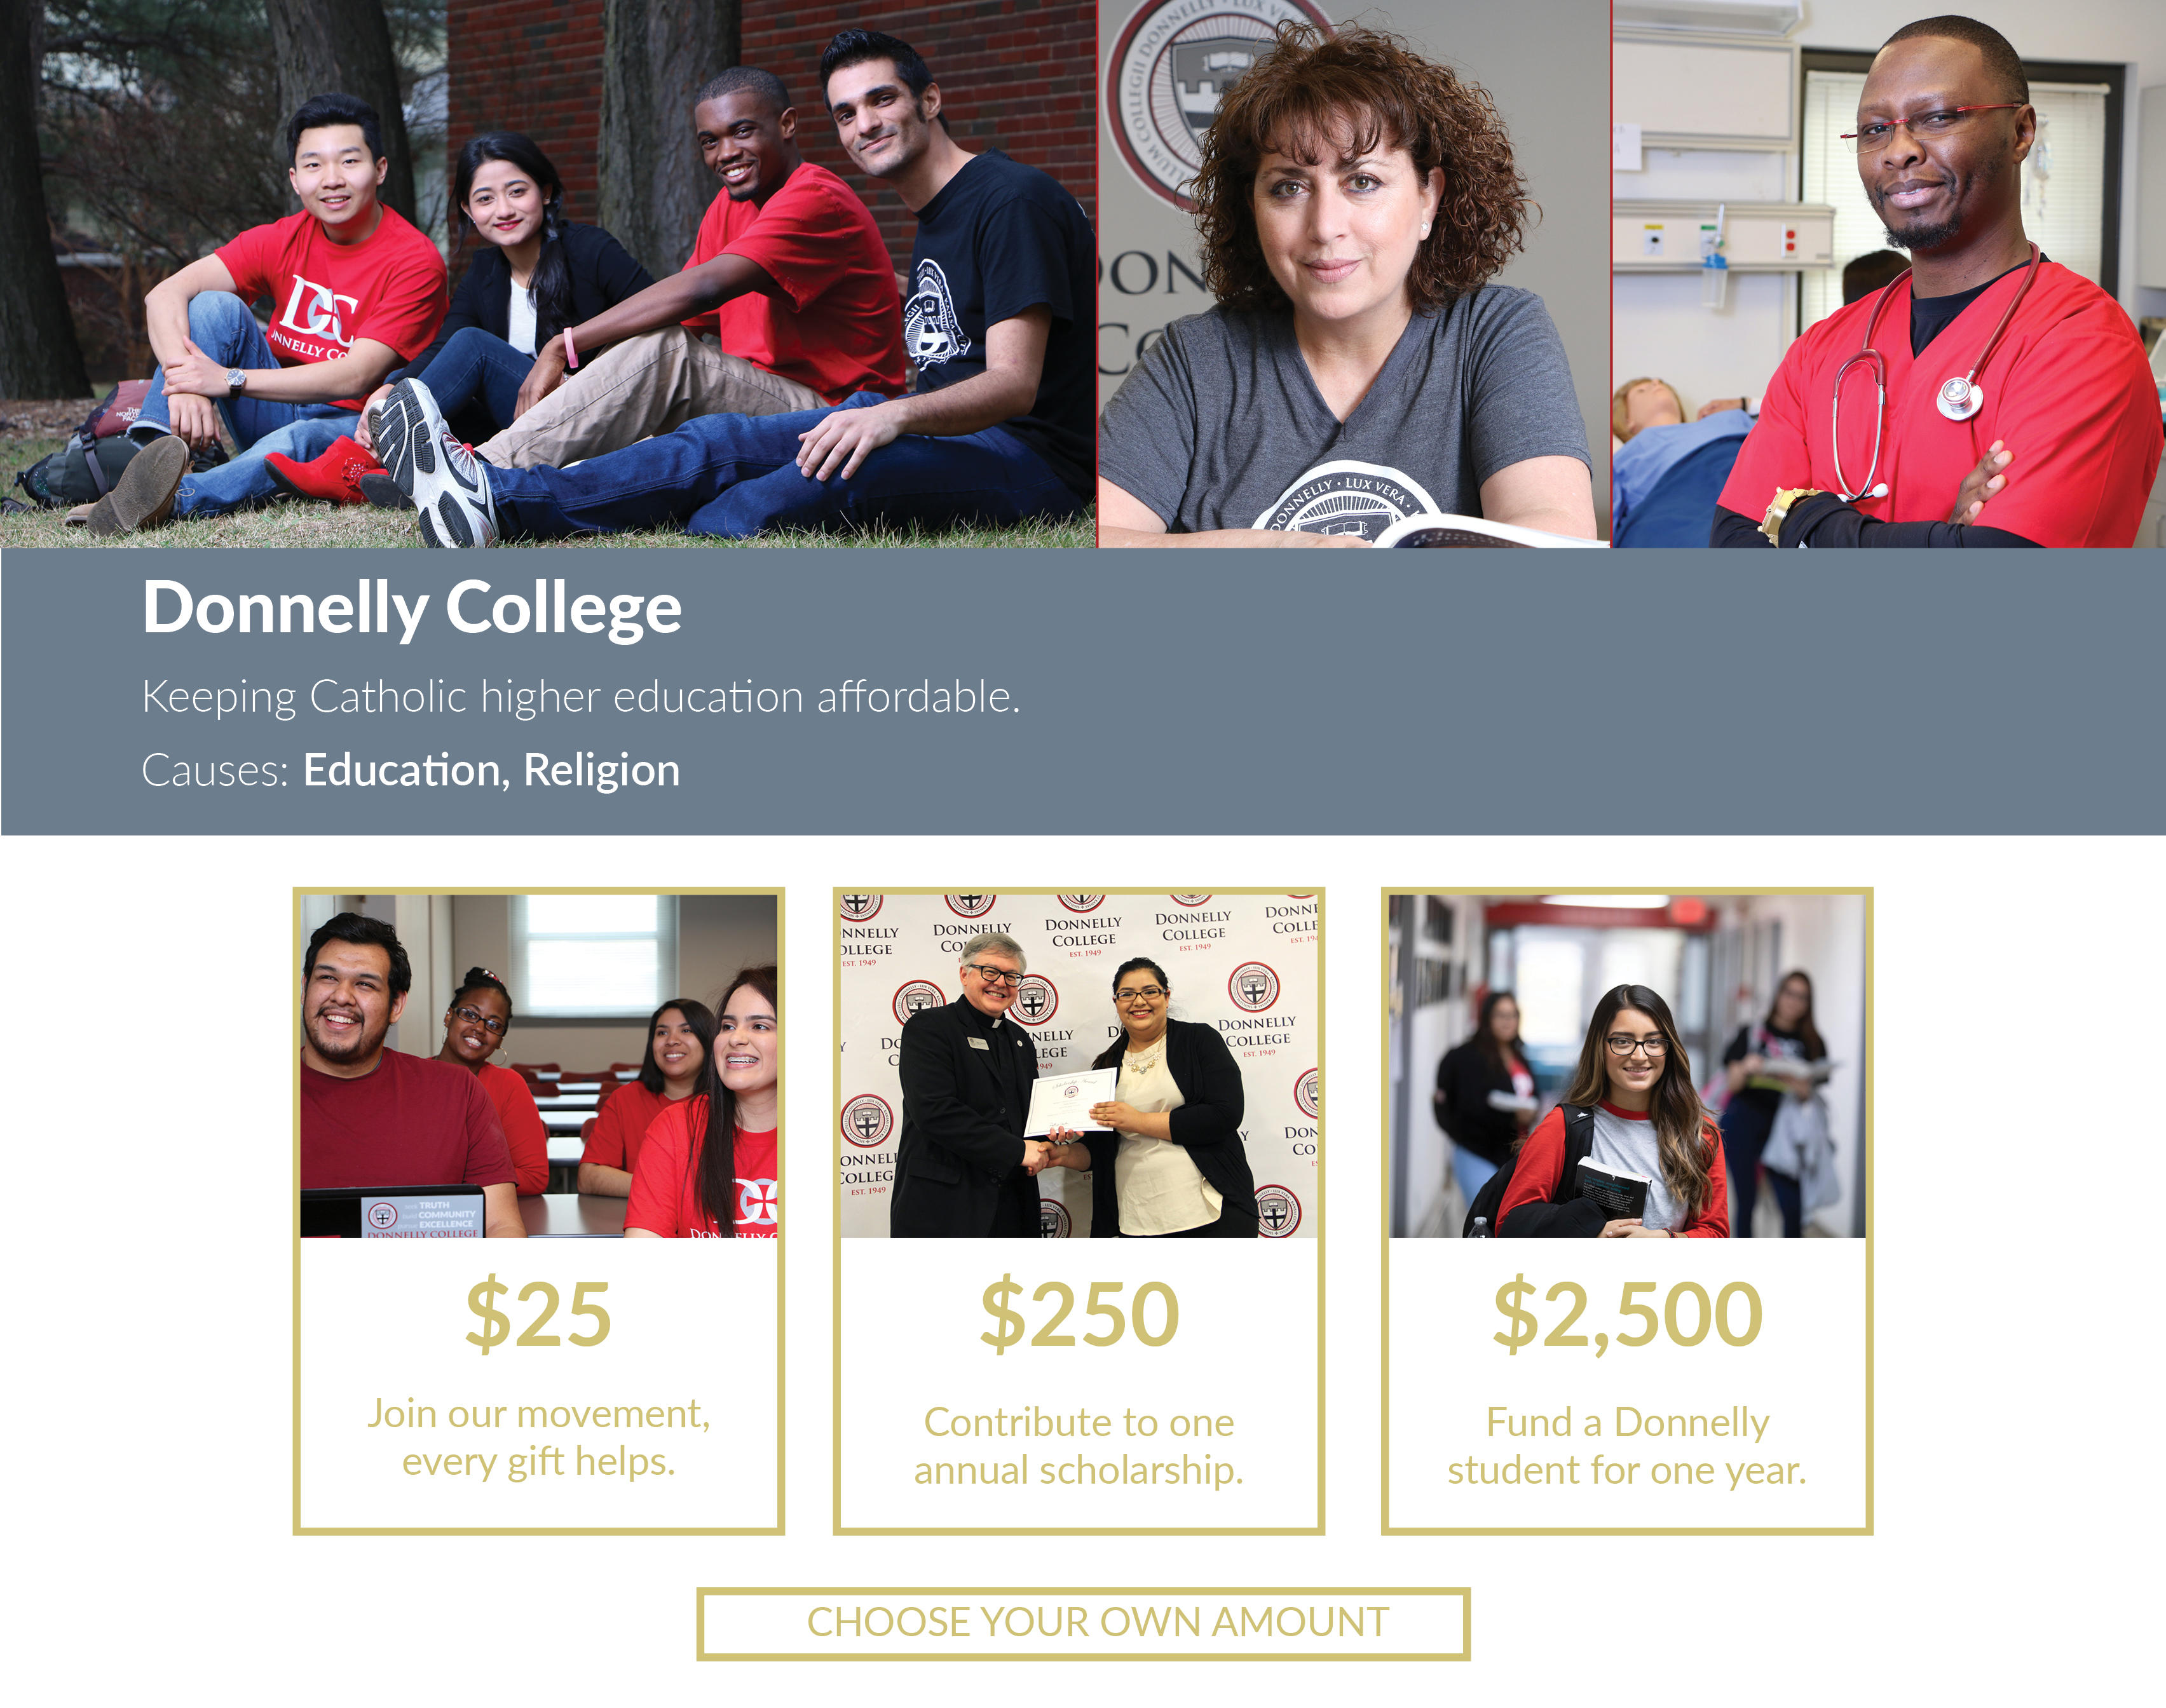 Donate to Donnelly College on Giving Tuesday 